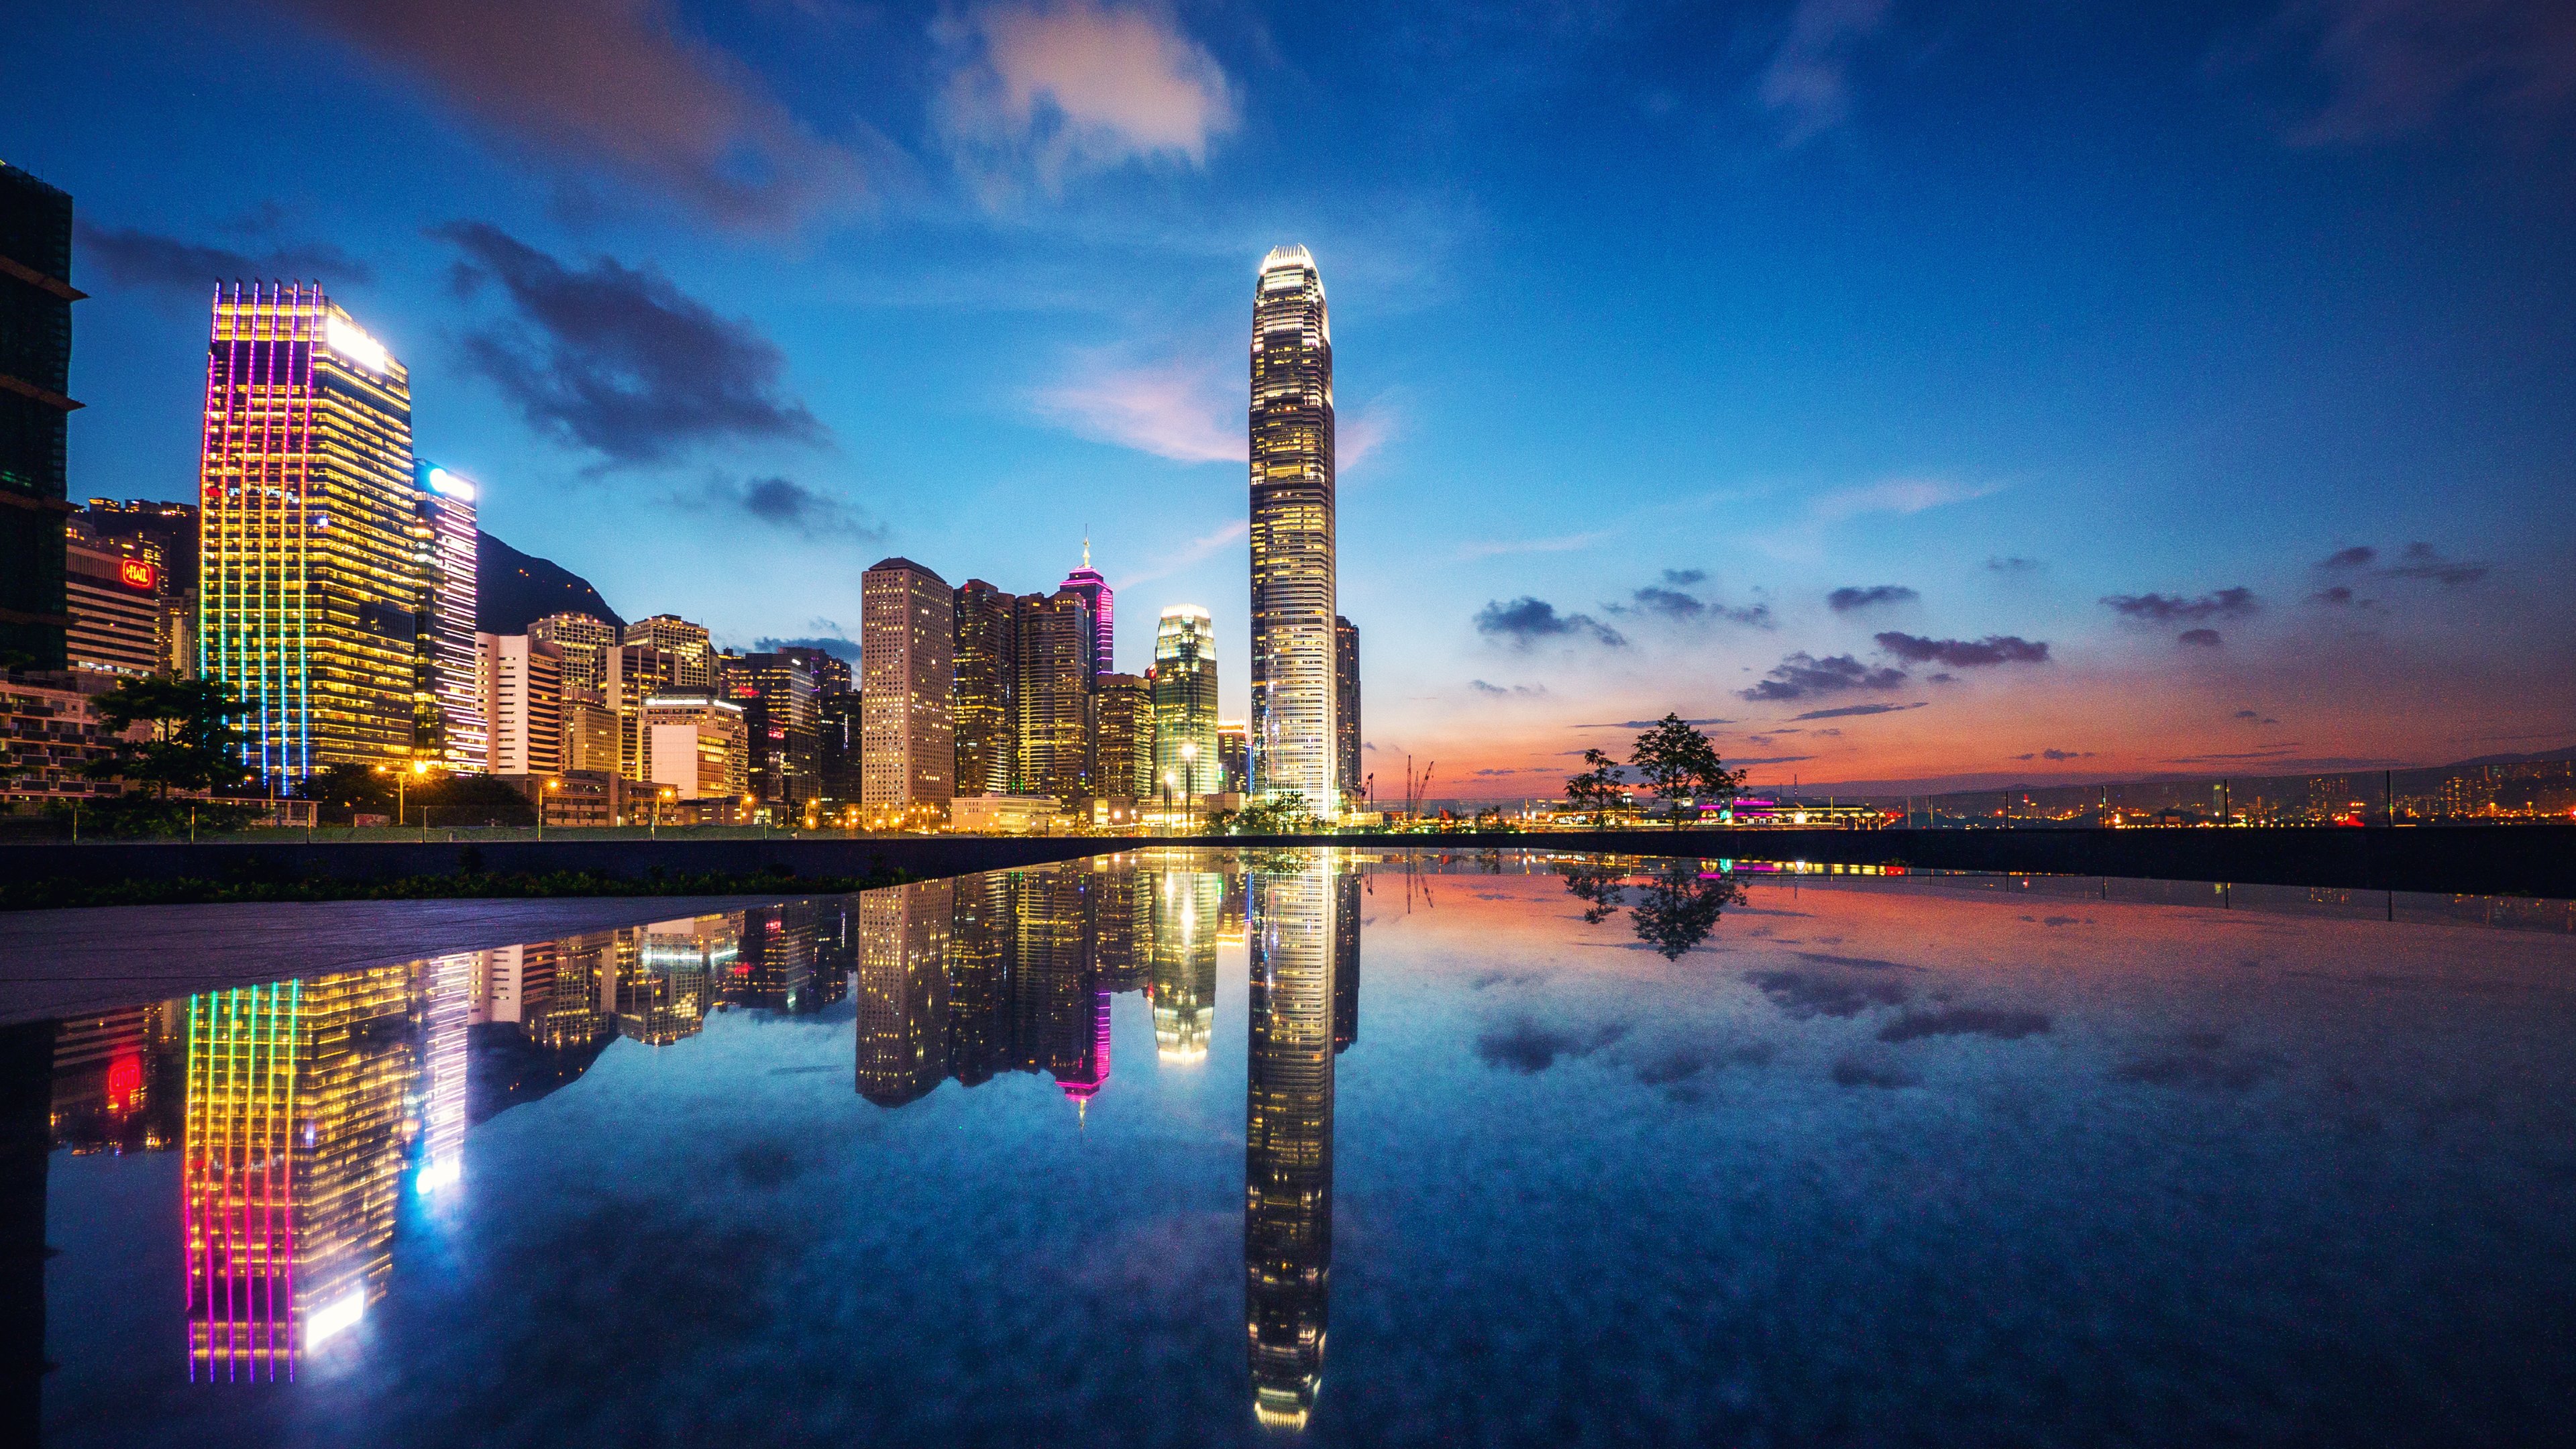 man made, architecture, cities, hong kong, reflection, building, cityscape, twilight